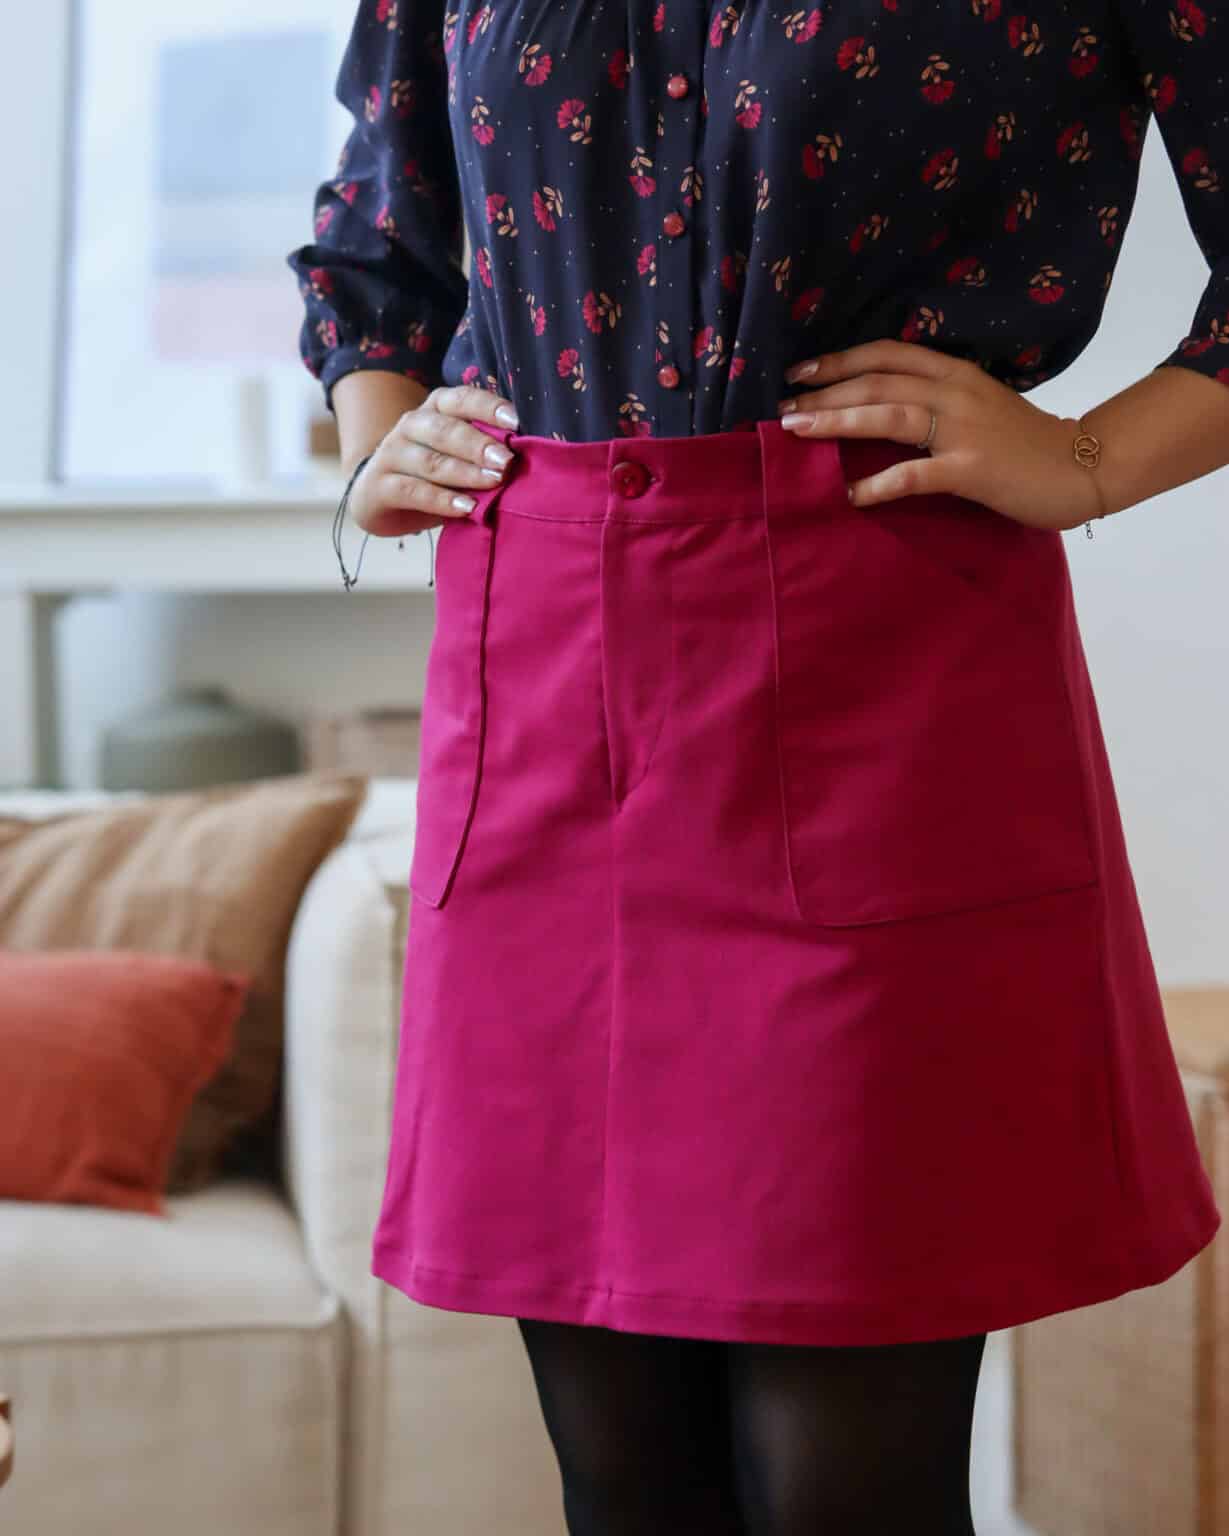 Lise Tailor - Groovy Skirt Sewing Pattern